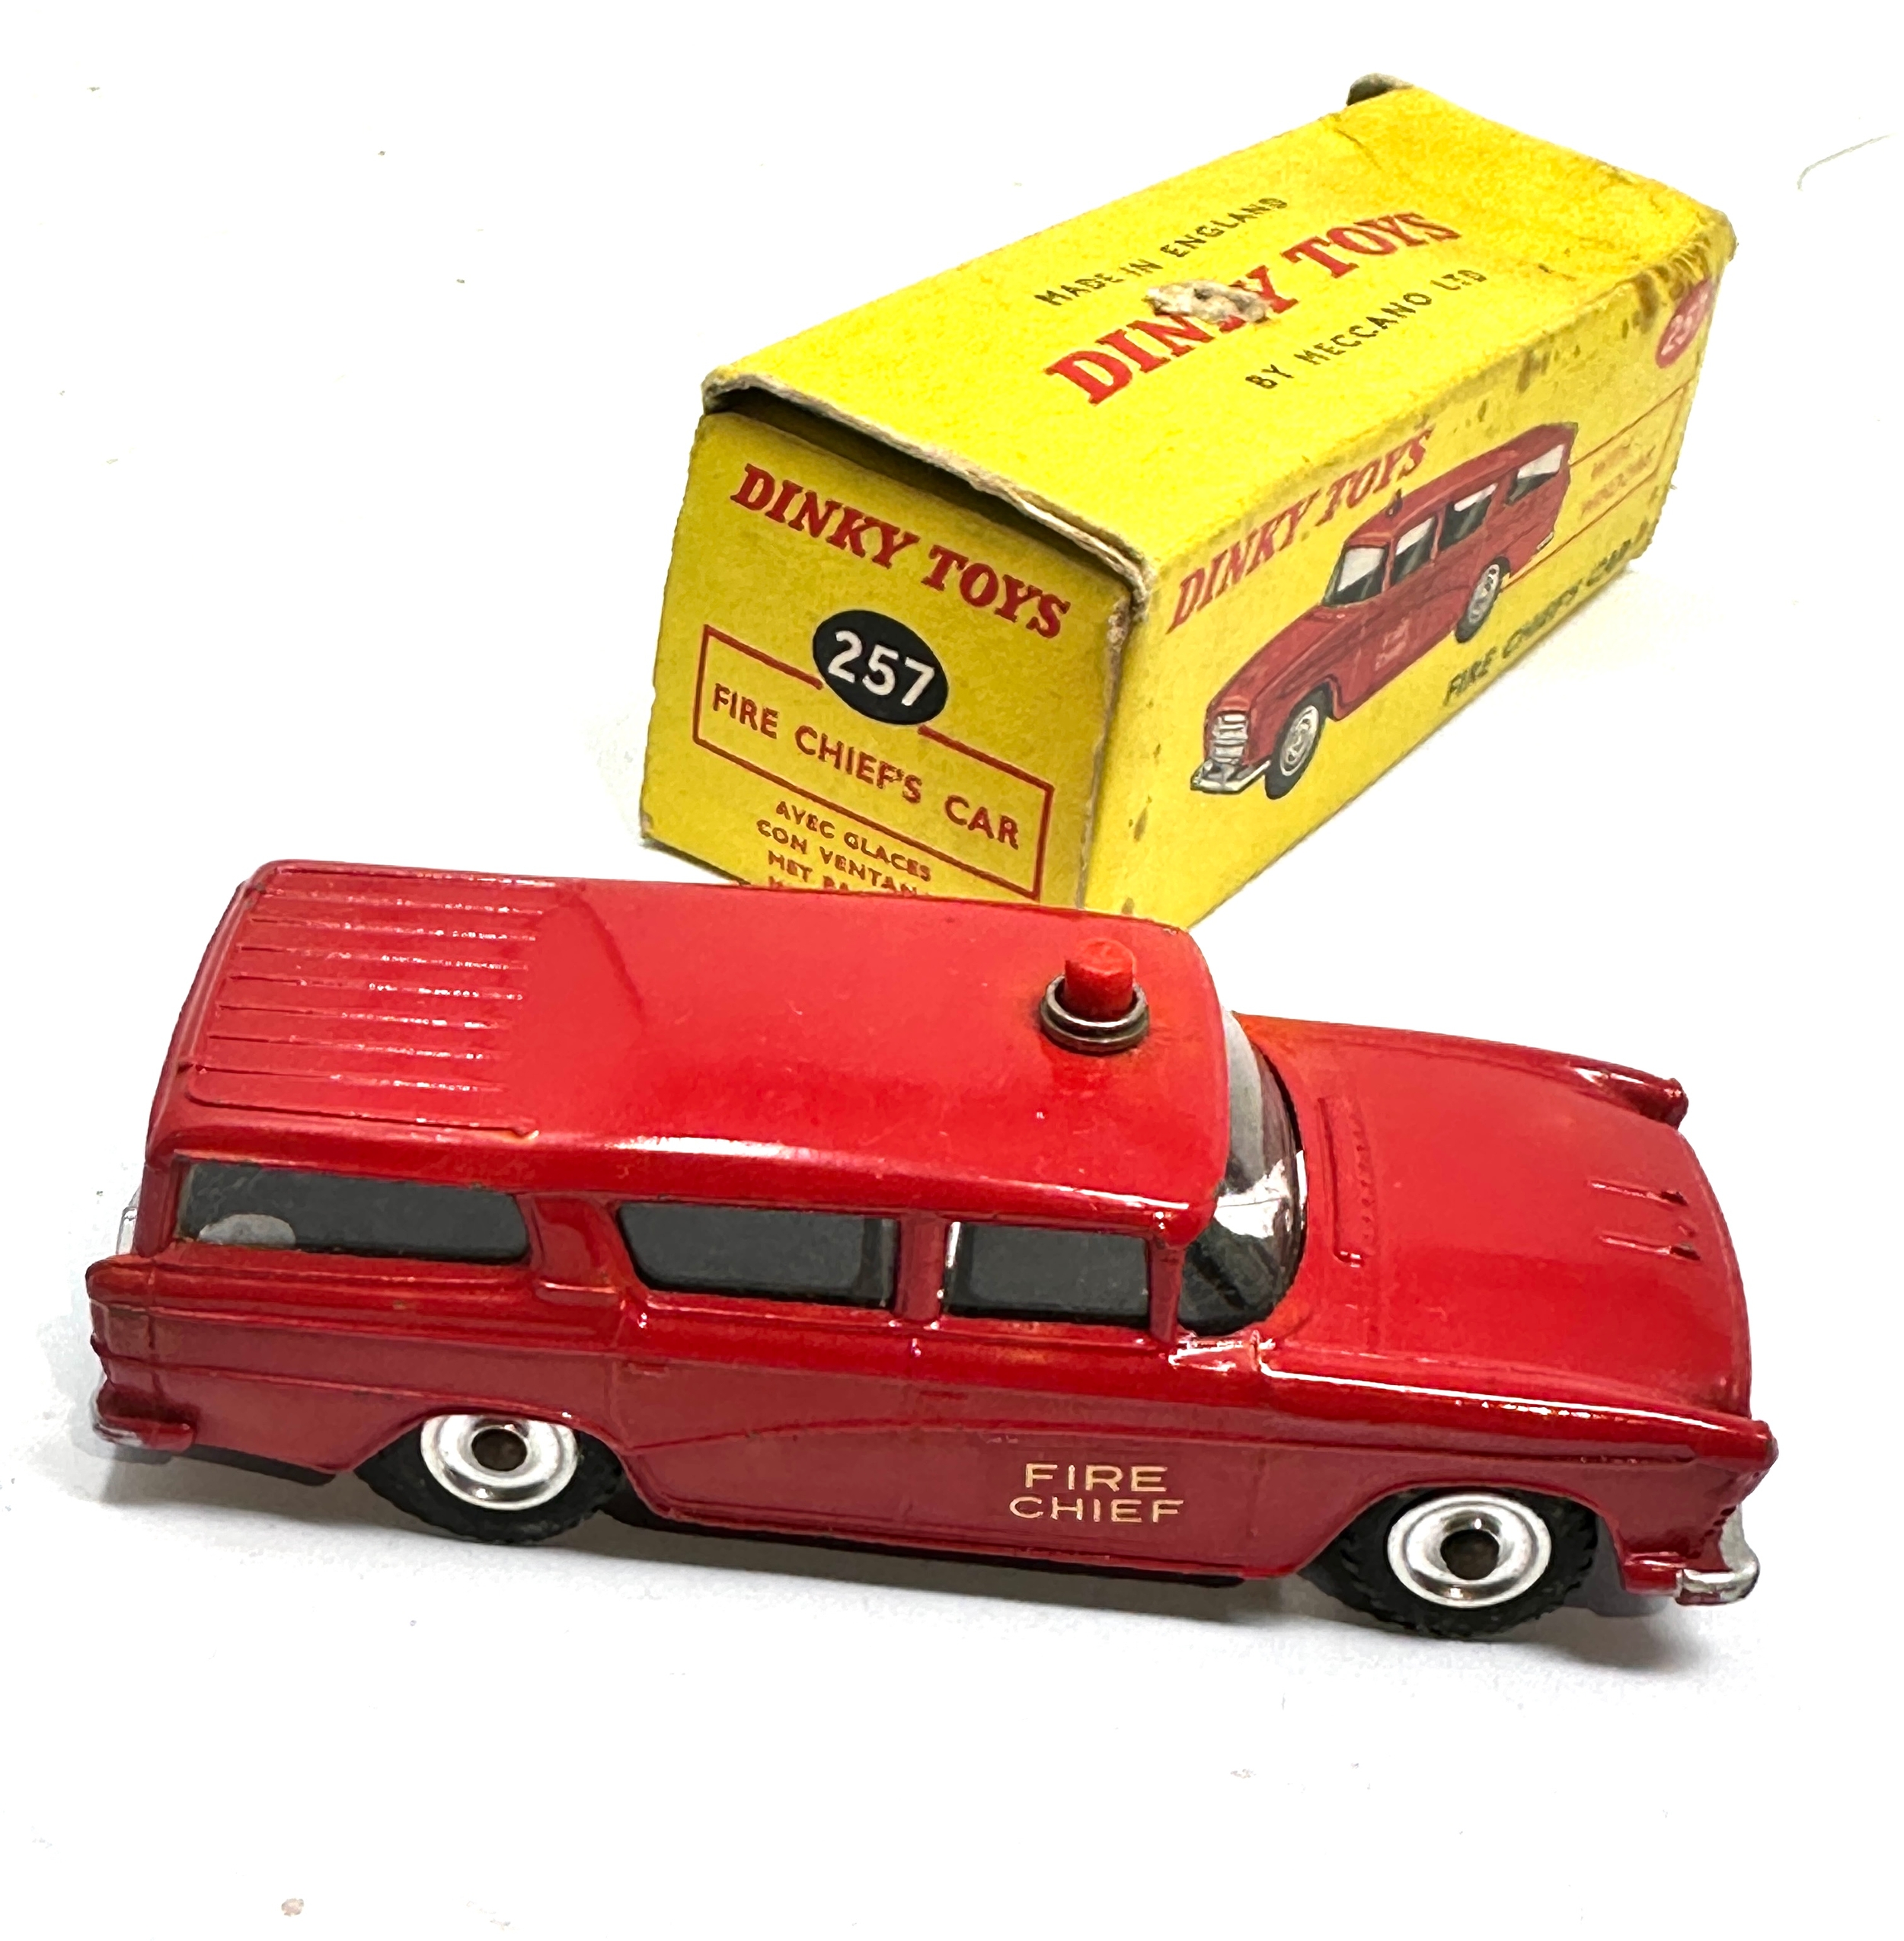 DINKY TOYS 257 Fire Chief’s Car Boxed - Image 3 of 3